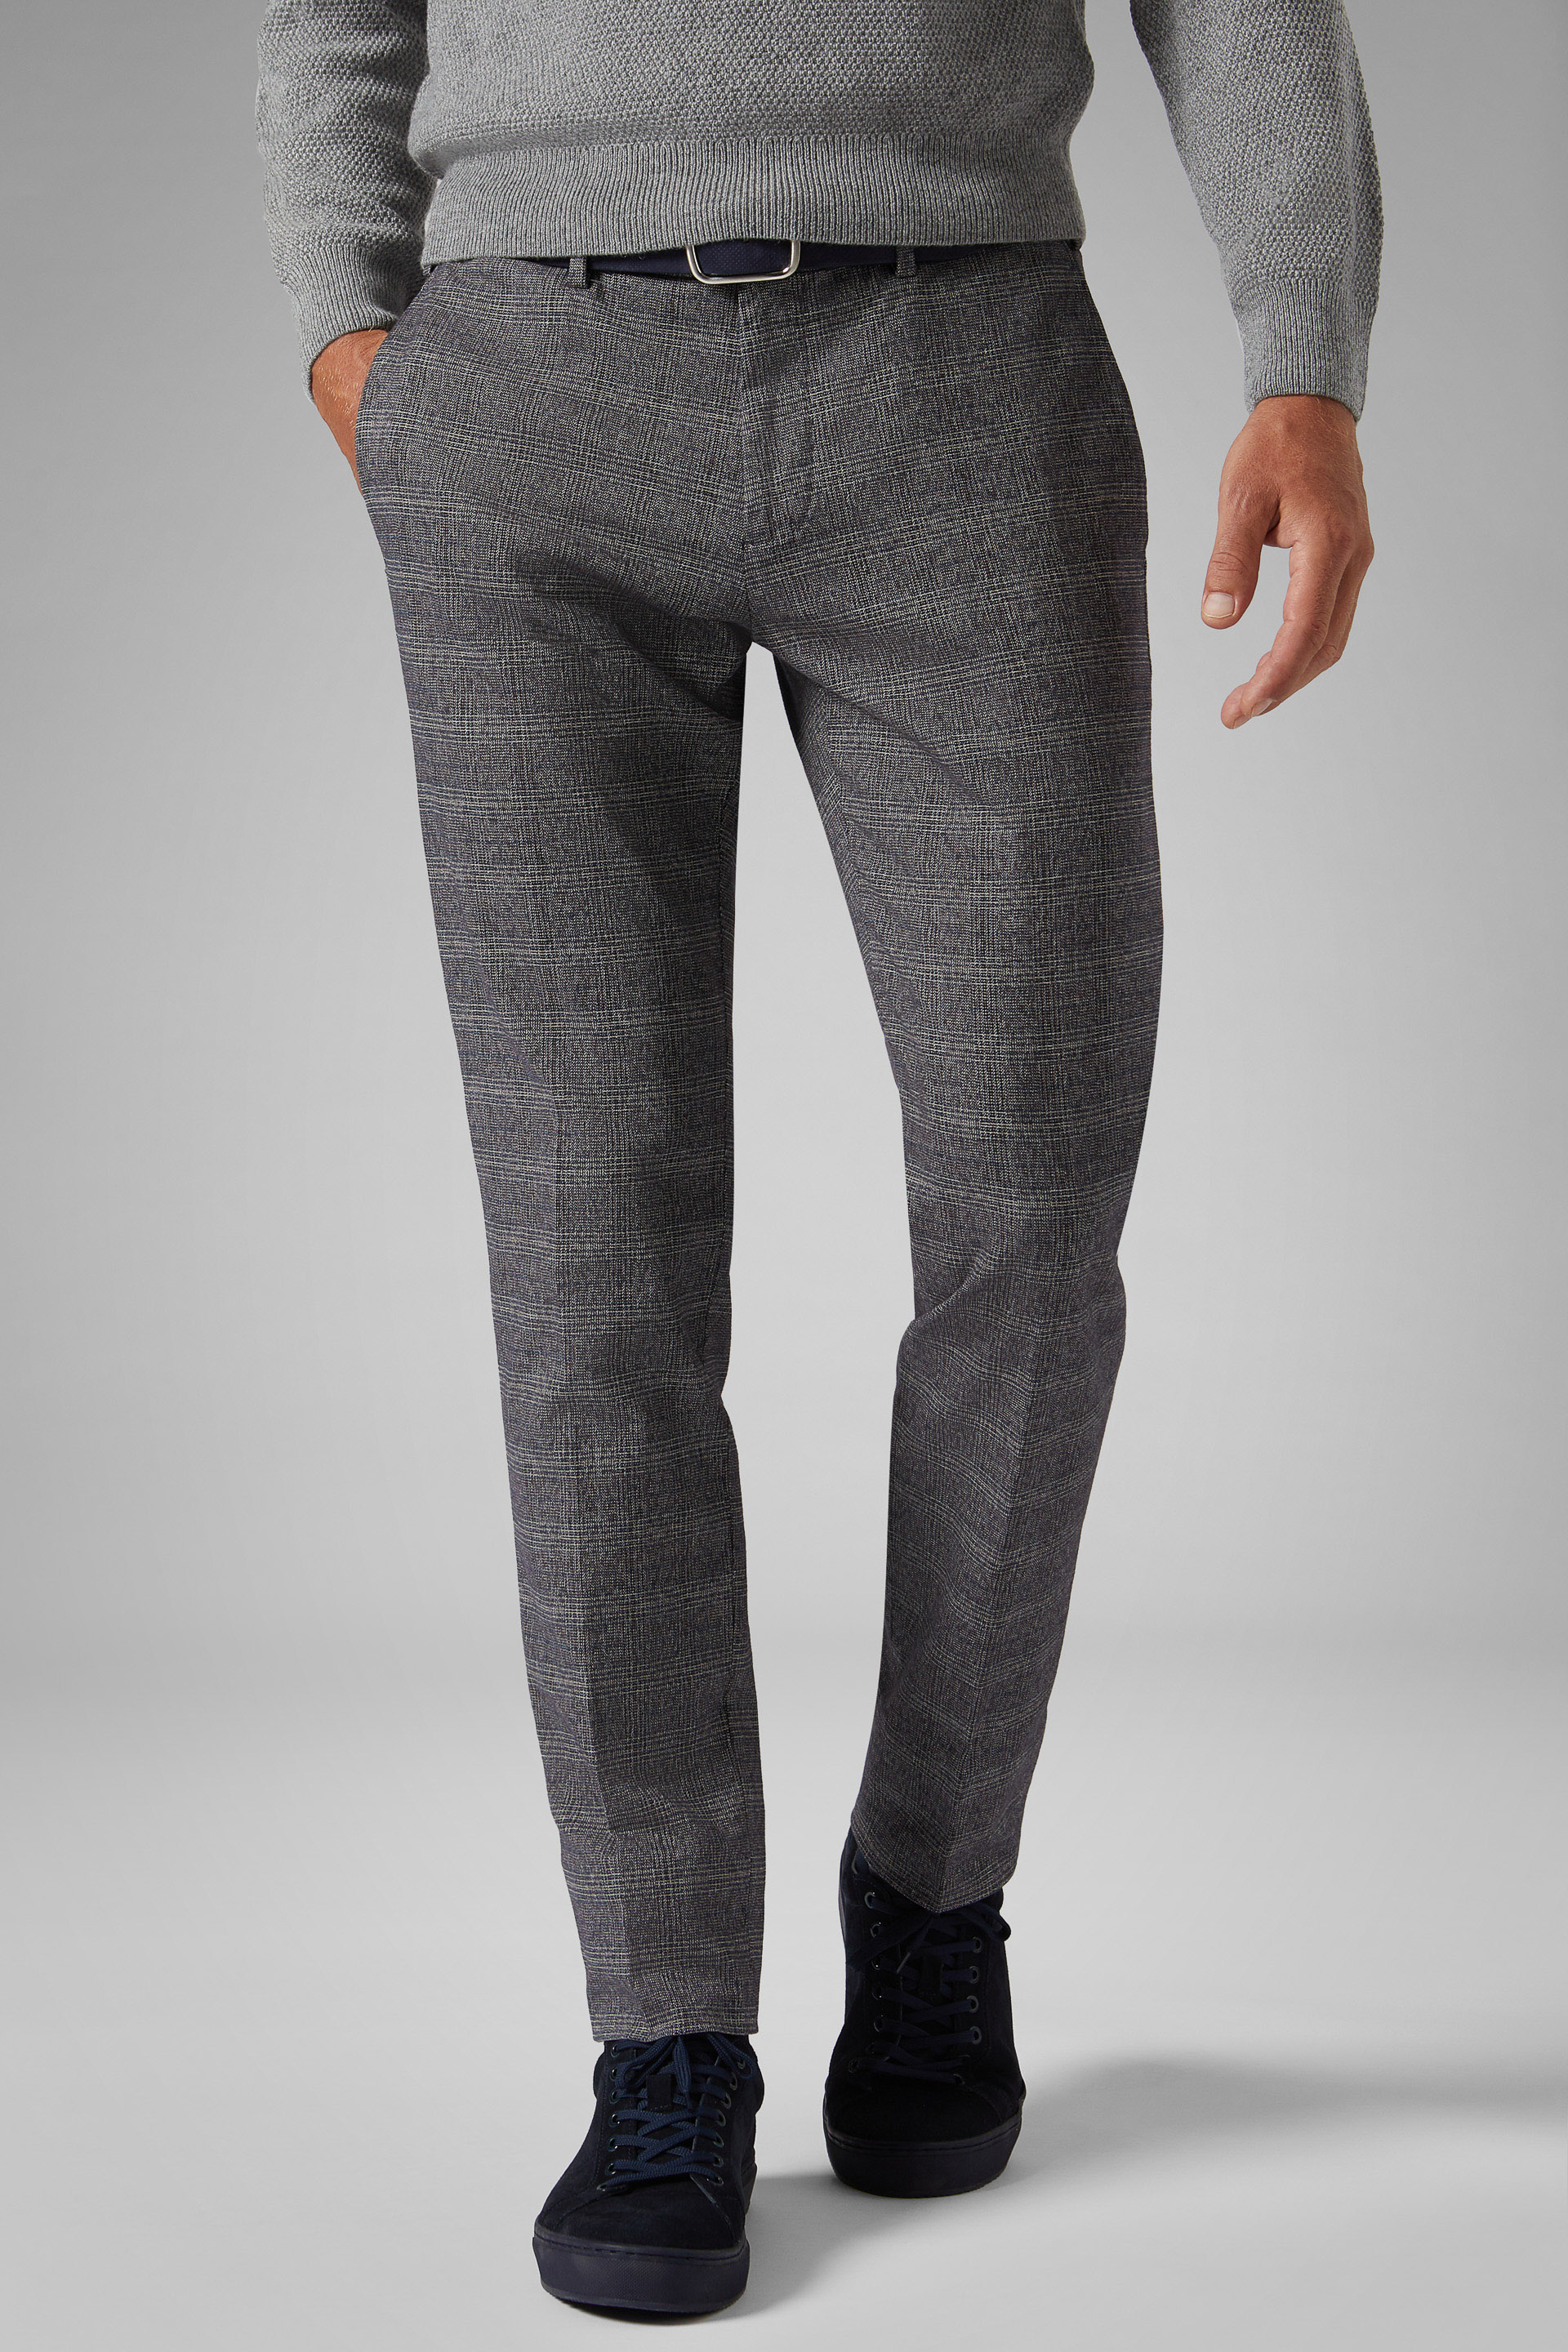 Prince of Wales Check Grey Trousers  Leonard Silver